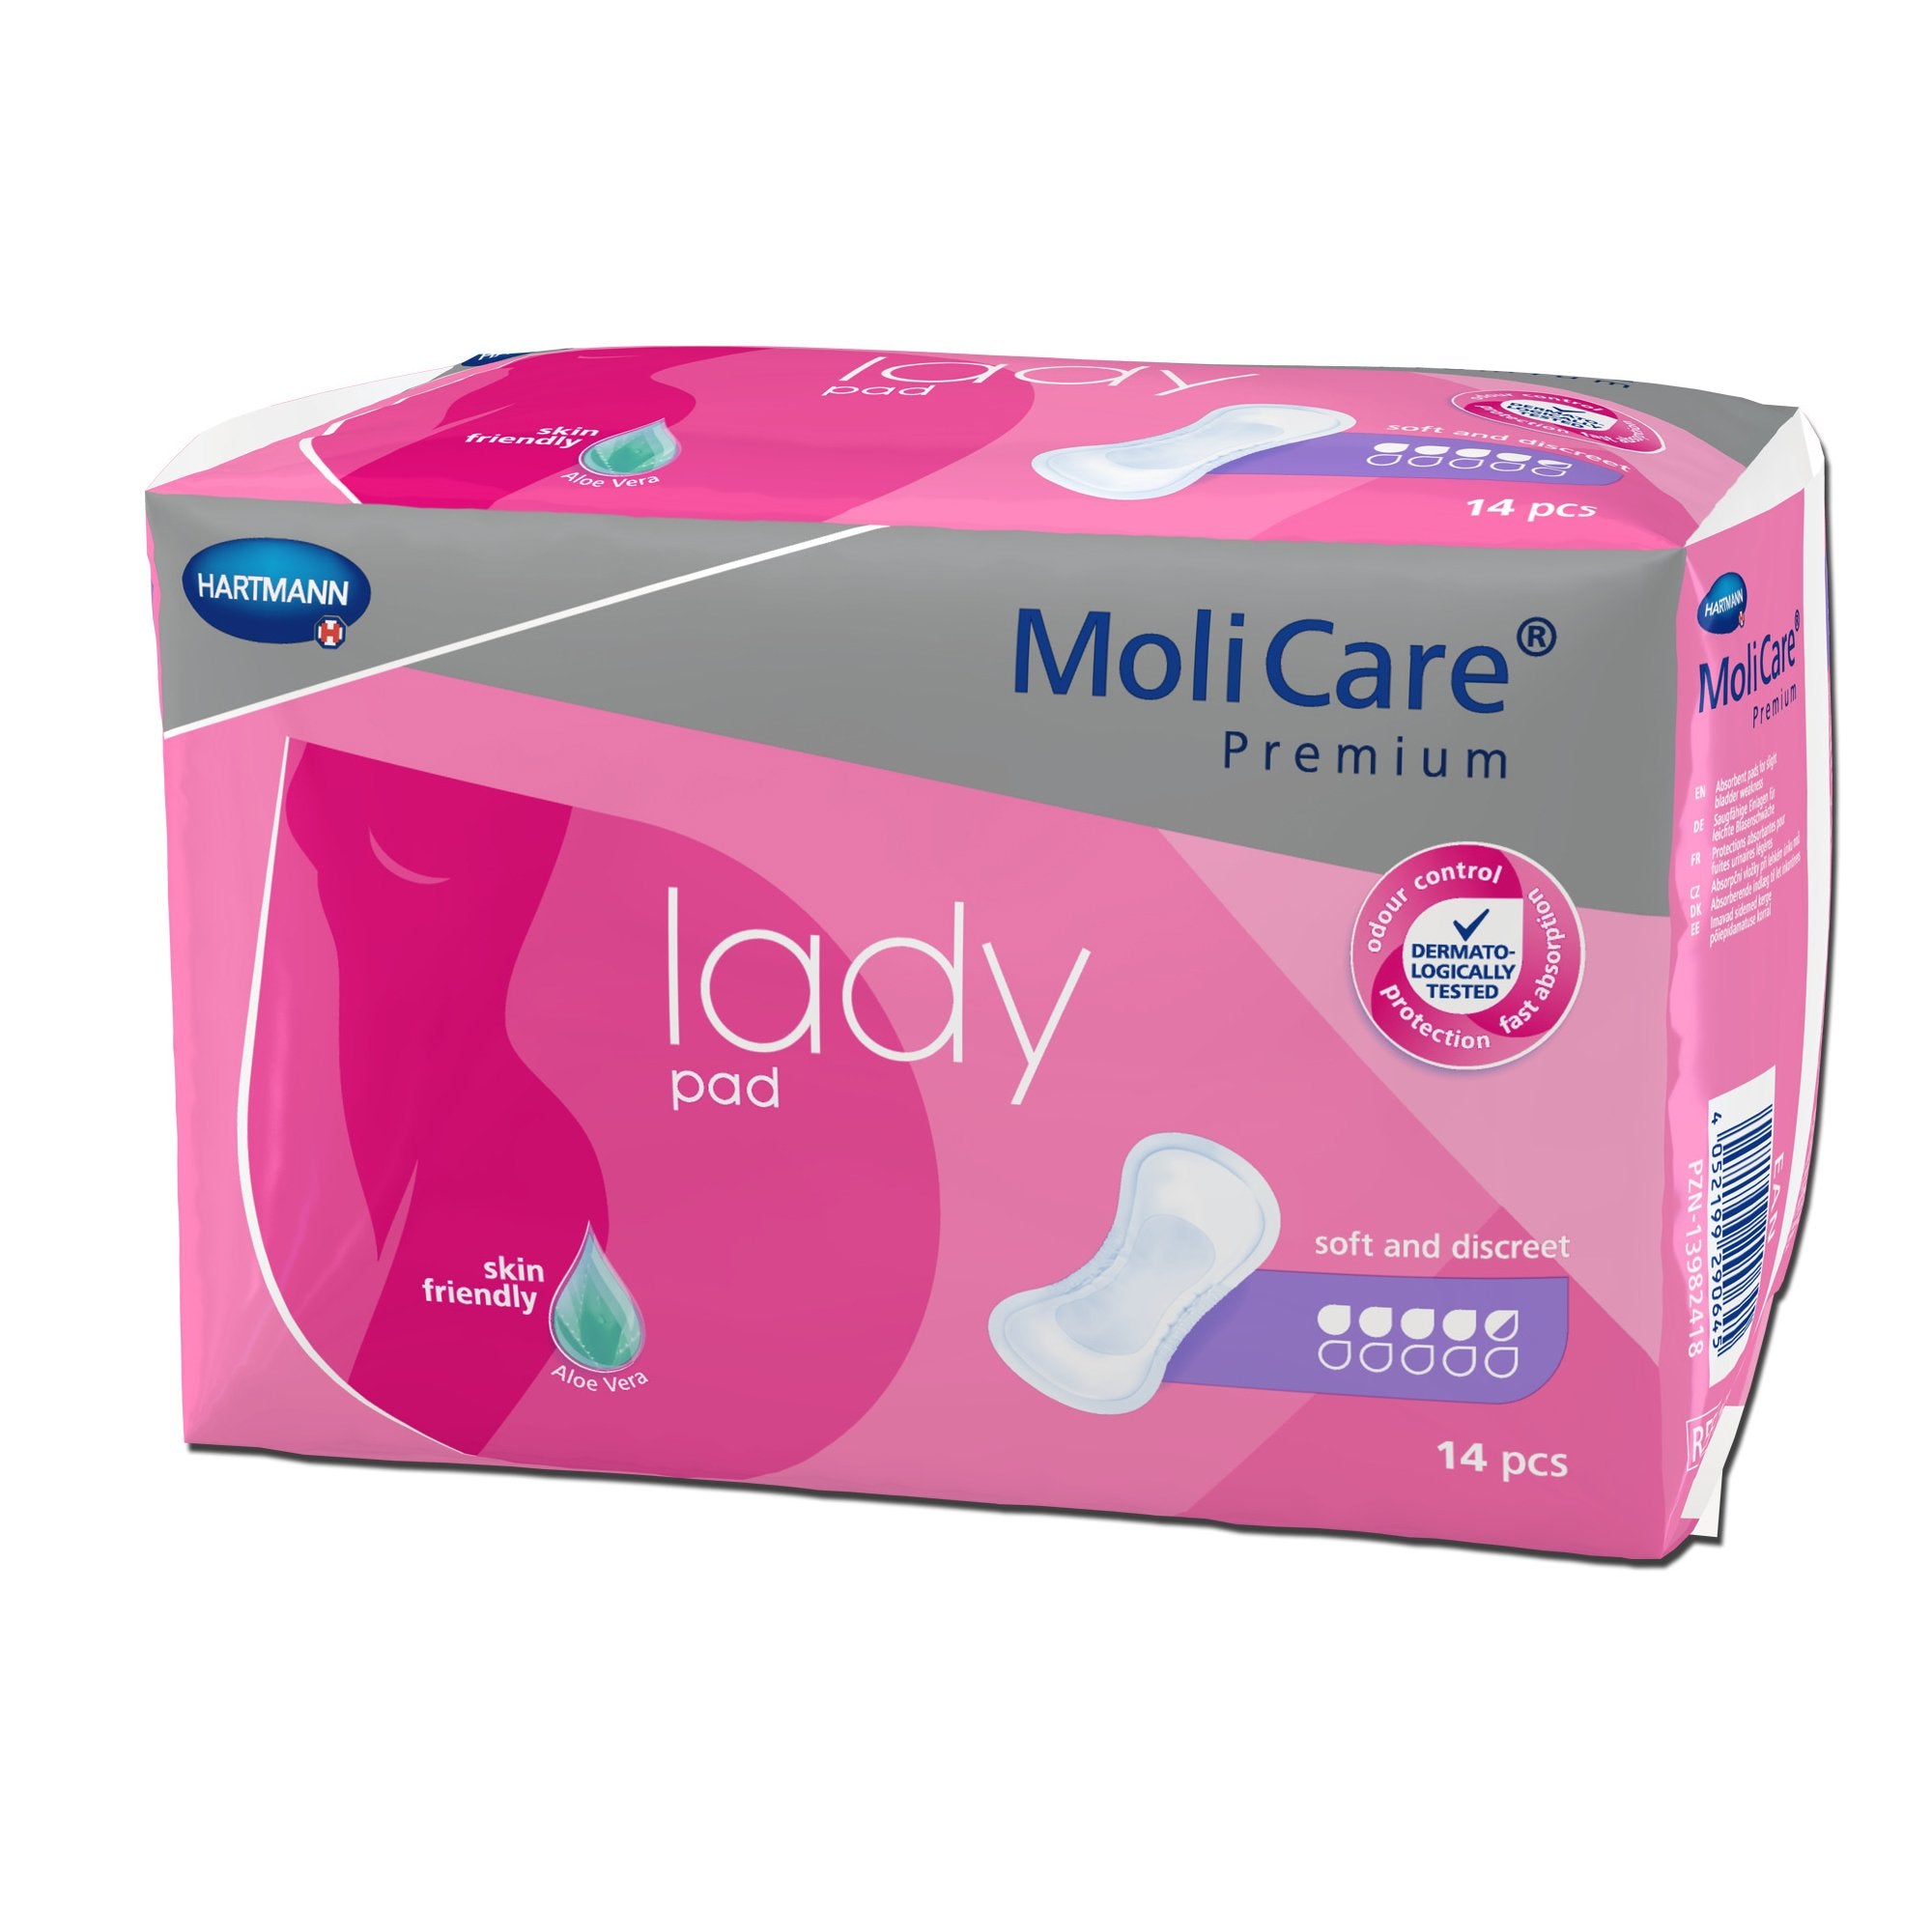 Bladder Control Pad MoliCare® Premium Lady Pads 6-1/2 X 16 Inch Moderate Absorbency Polymer Core One Size Fits Most